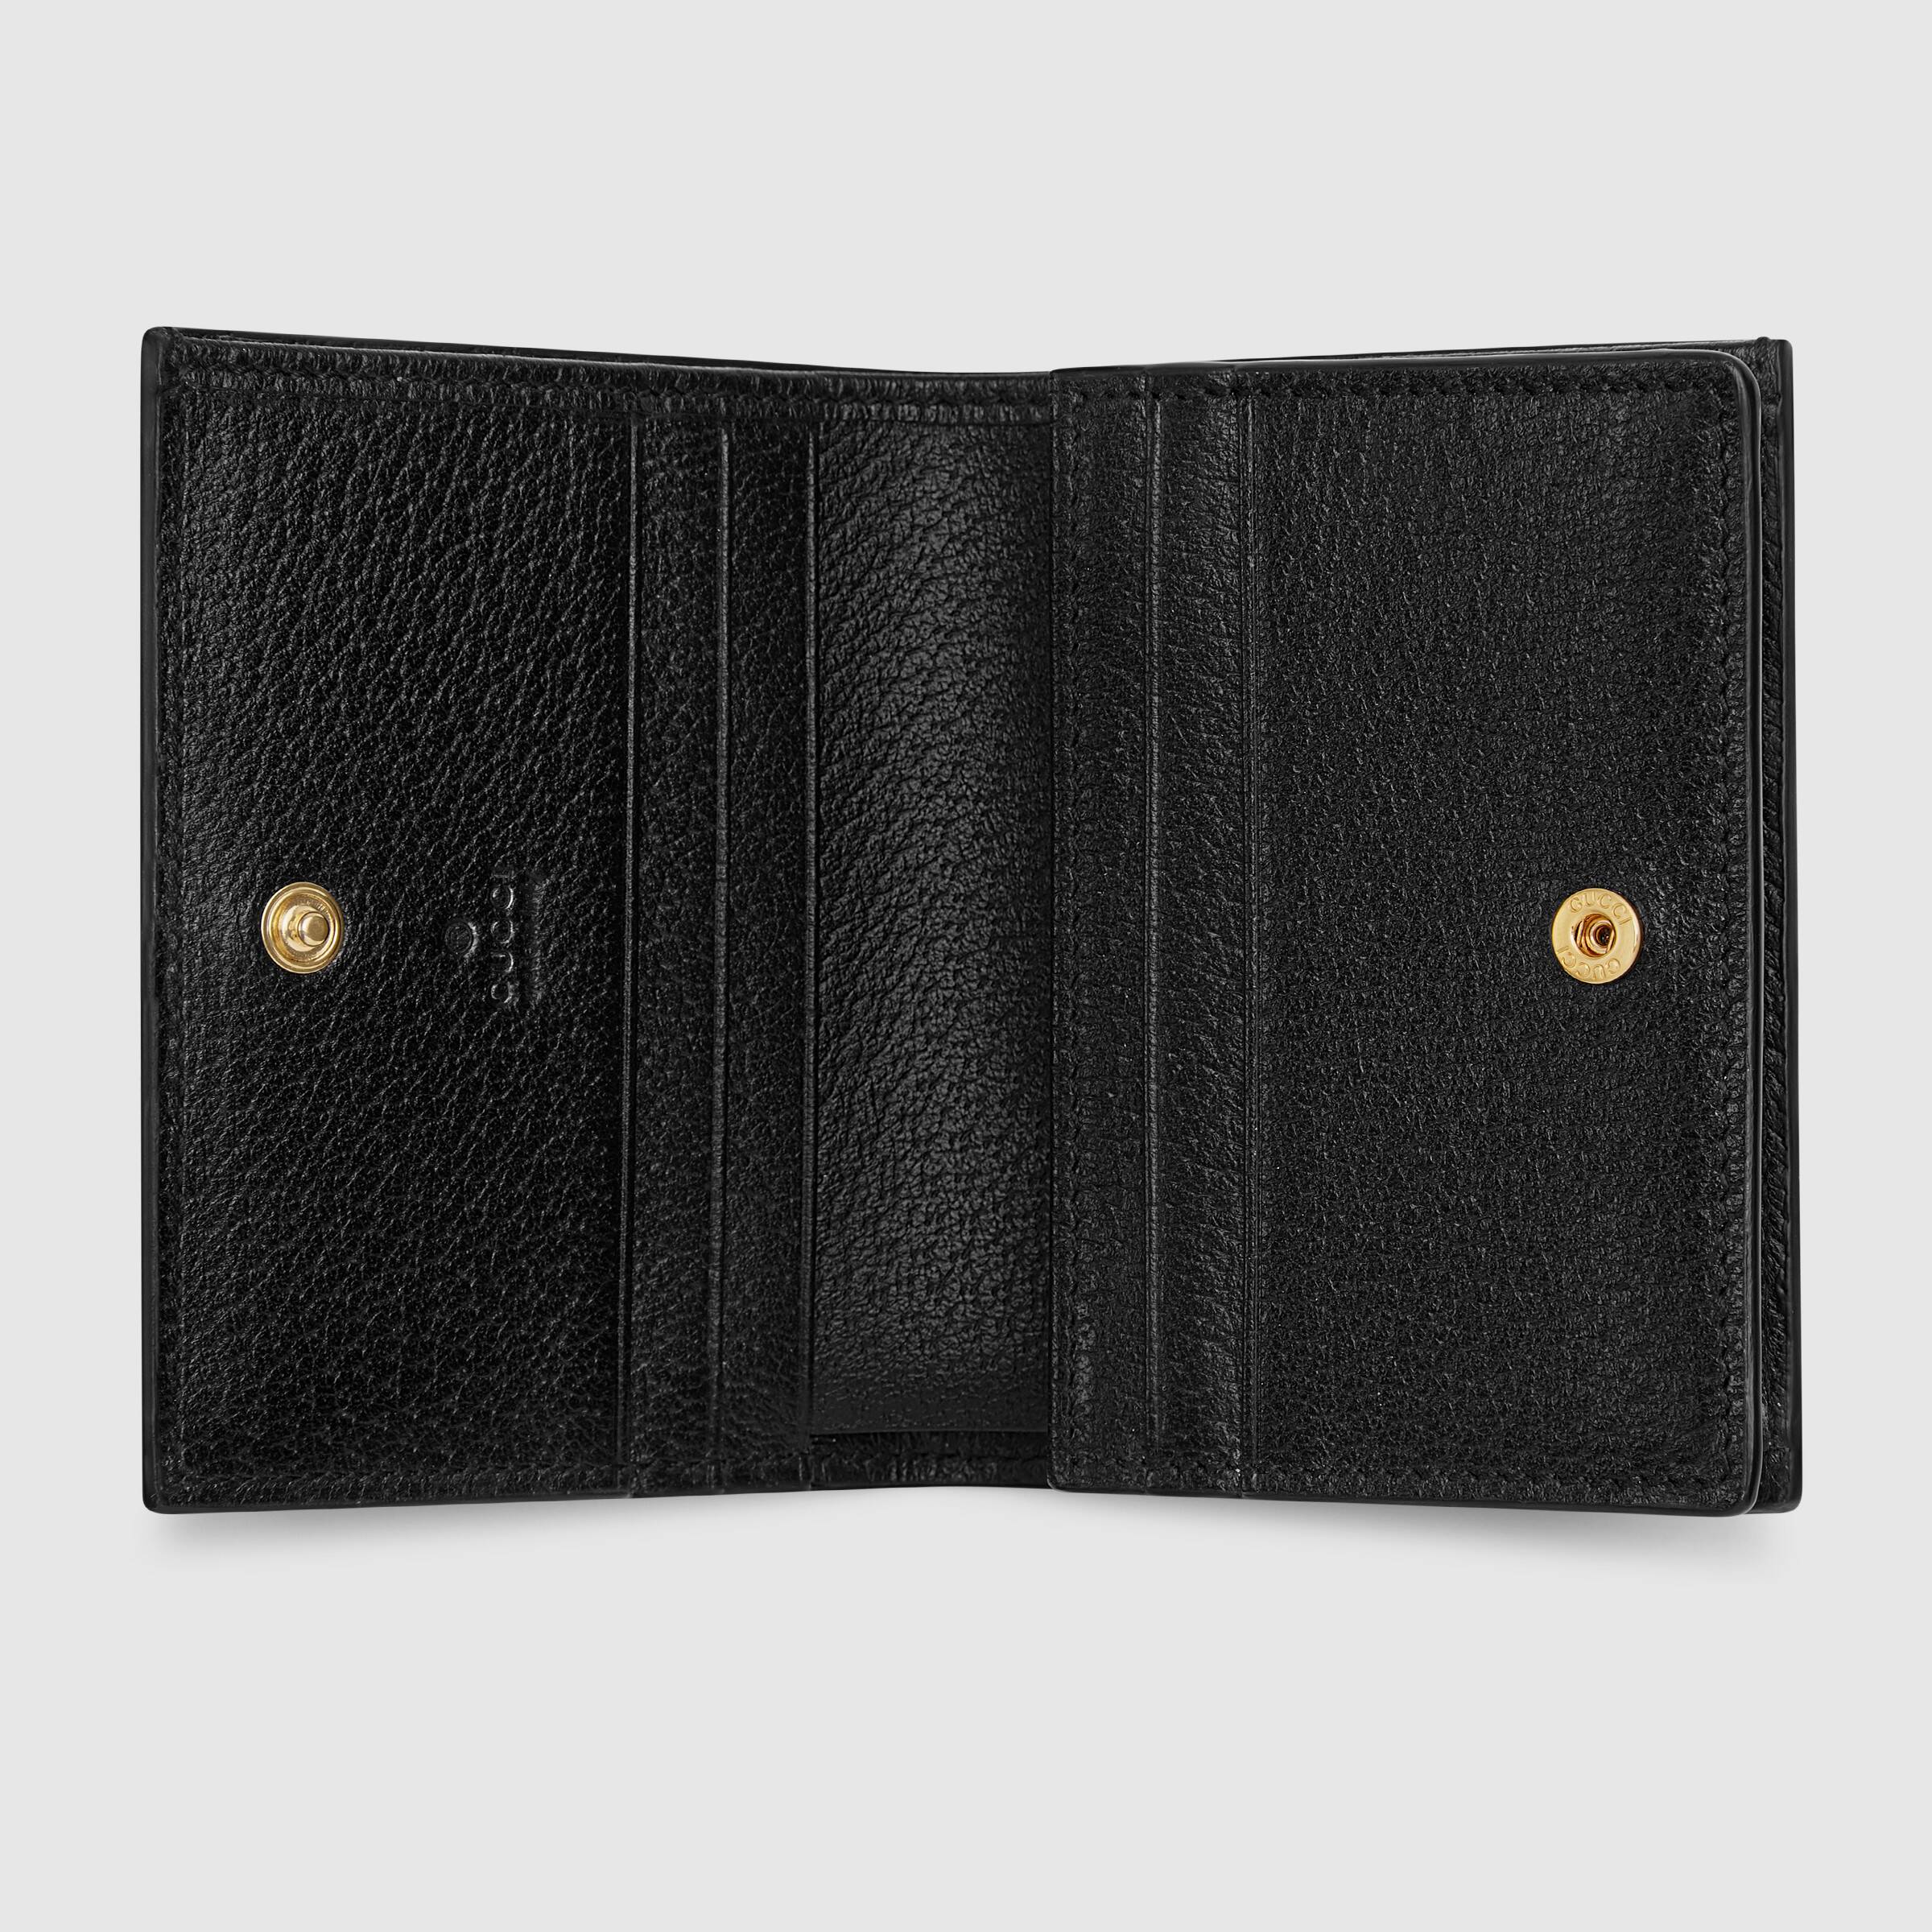 Gucci Ophidia Leather Card Case Wallet Black